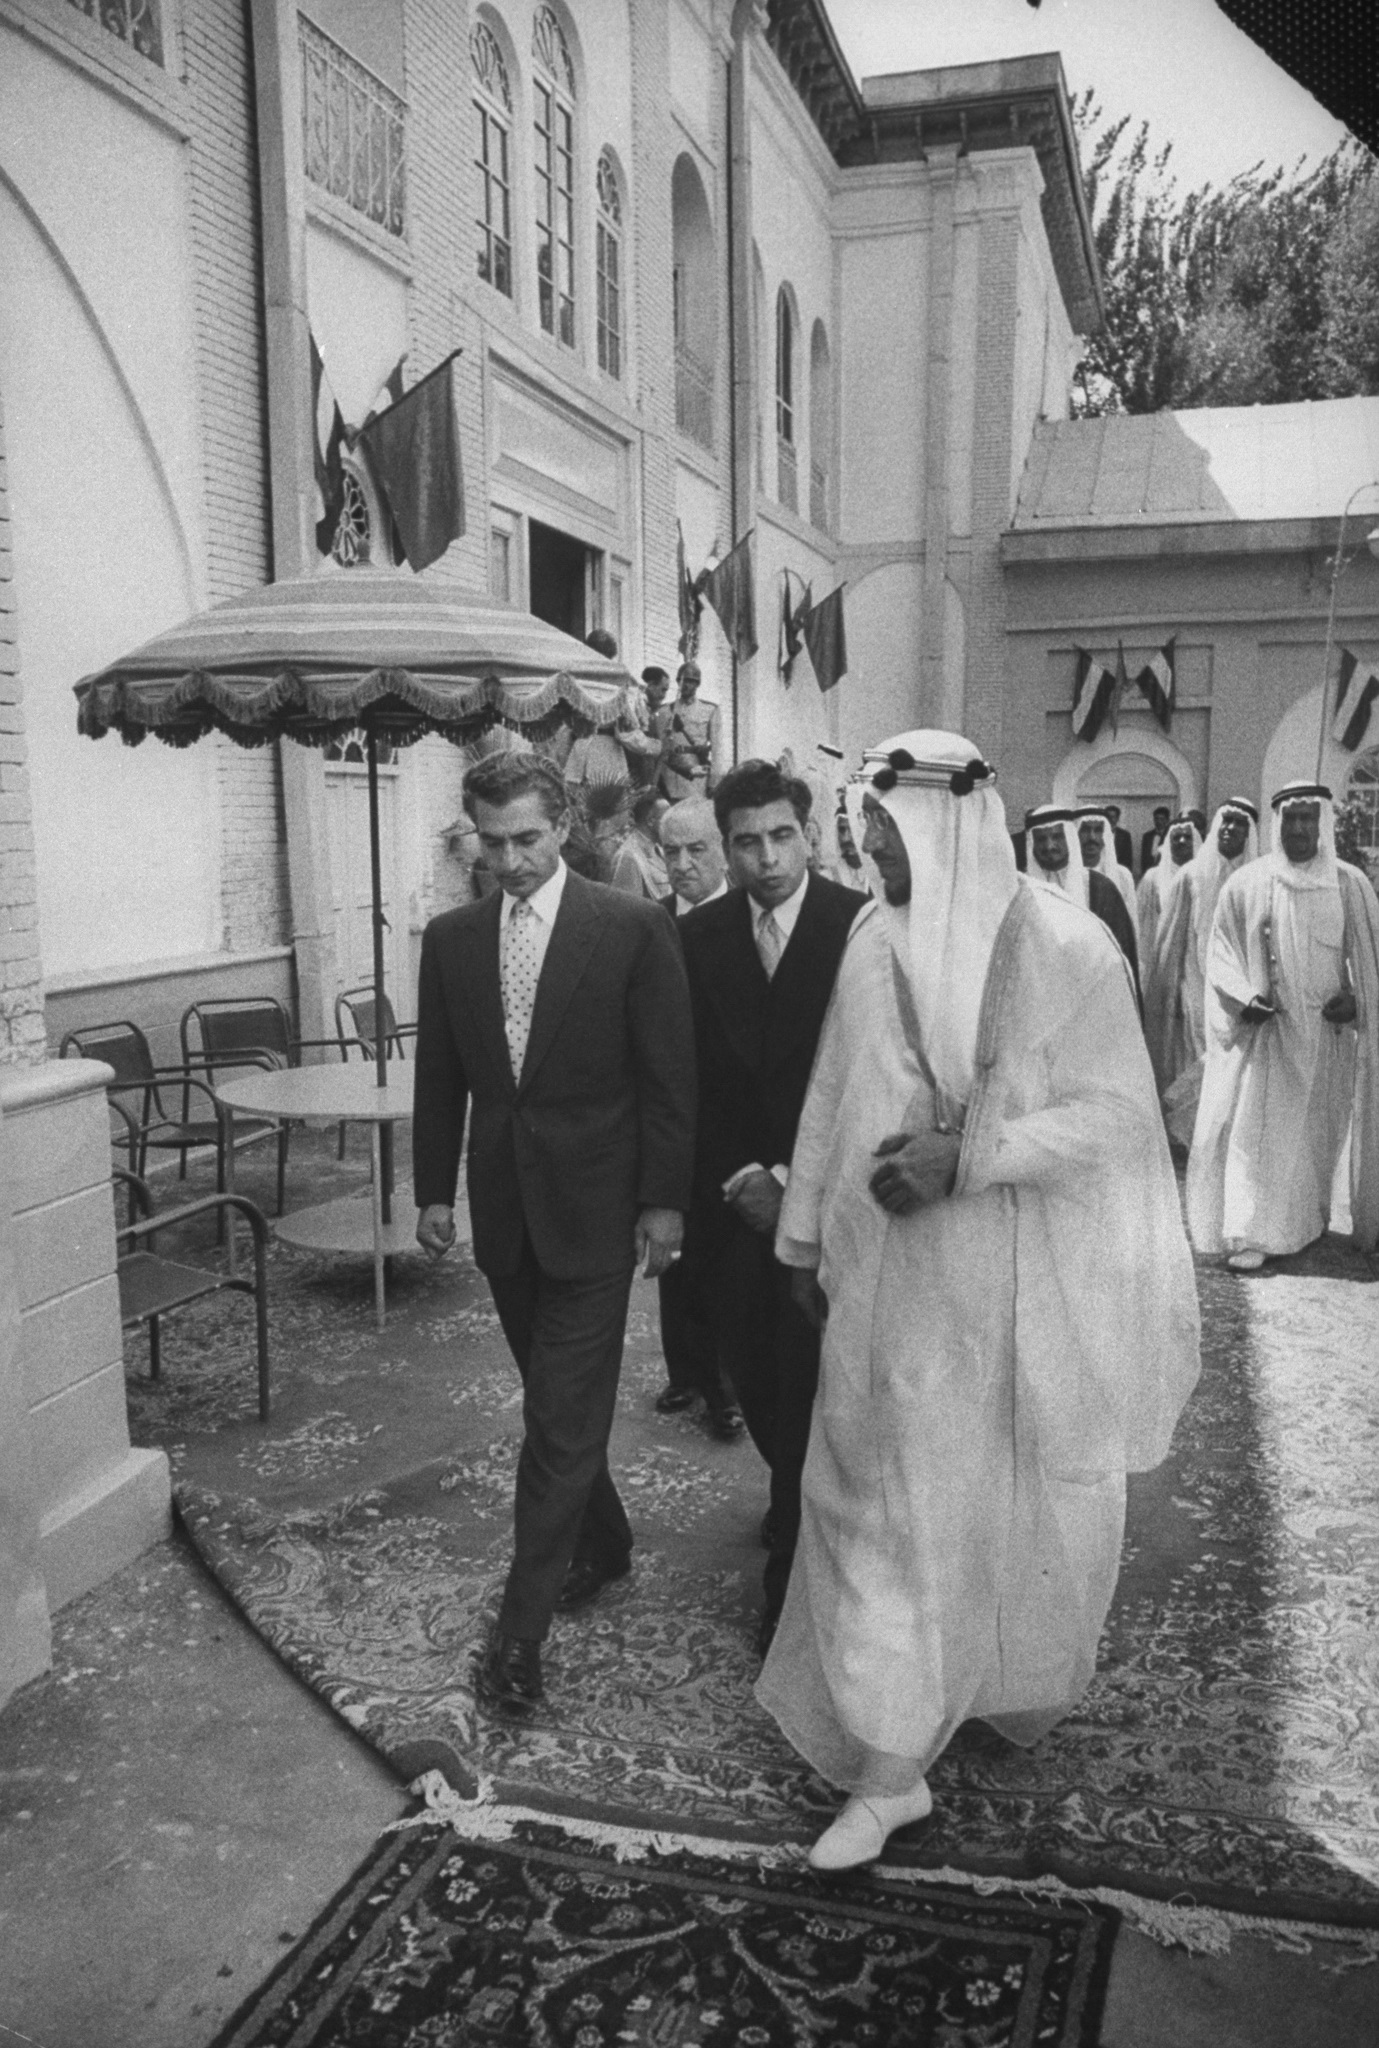 King Saud with Shah Mohamed Resa during his visit to Iran. (Photo by James WhitmoreTime Life PicturesGetty Images)